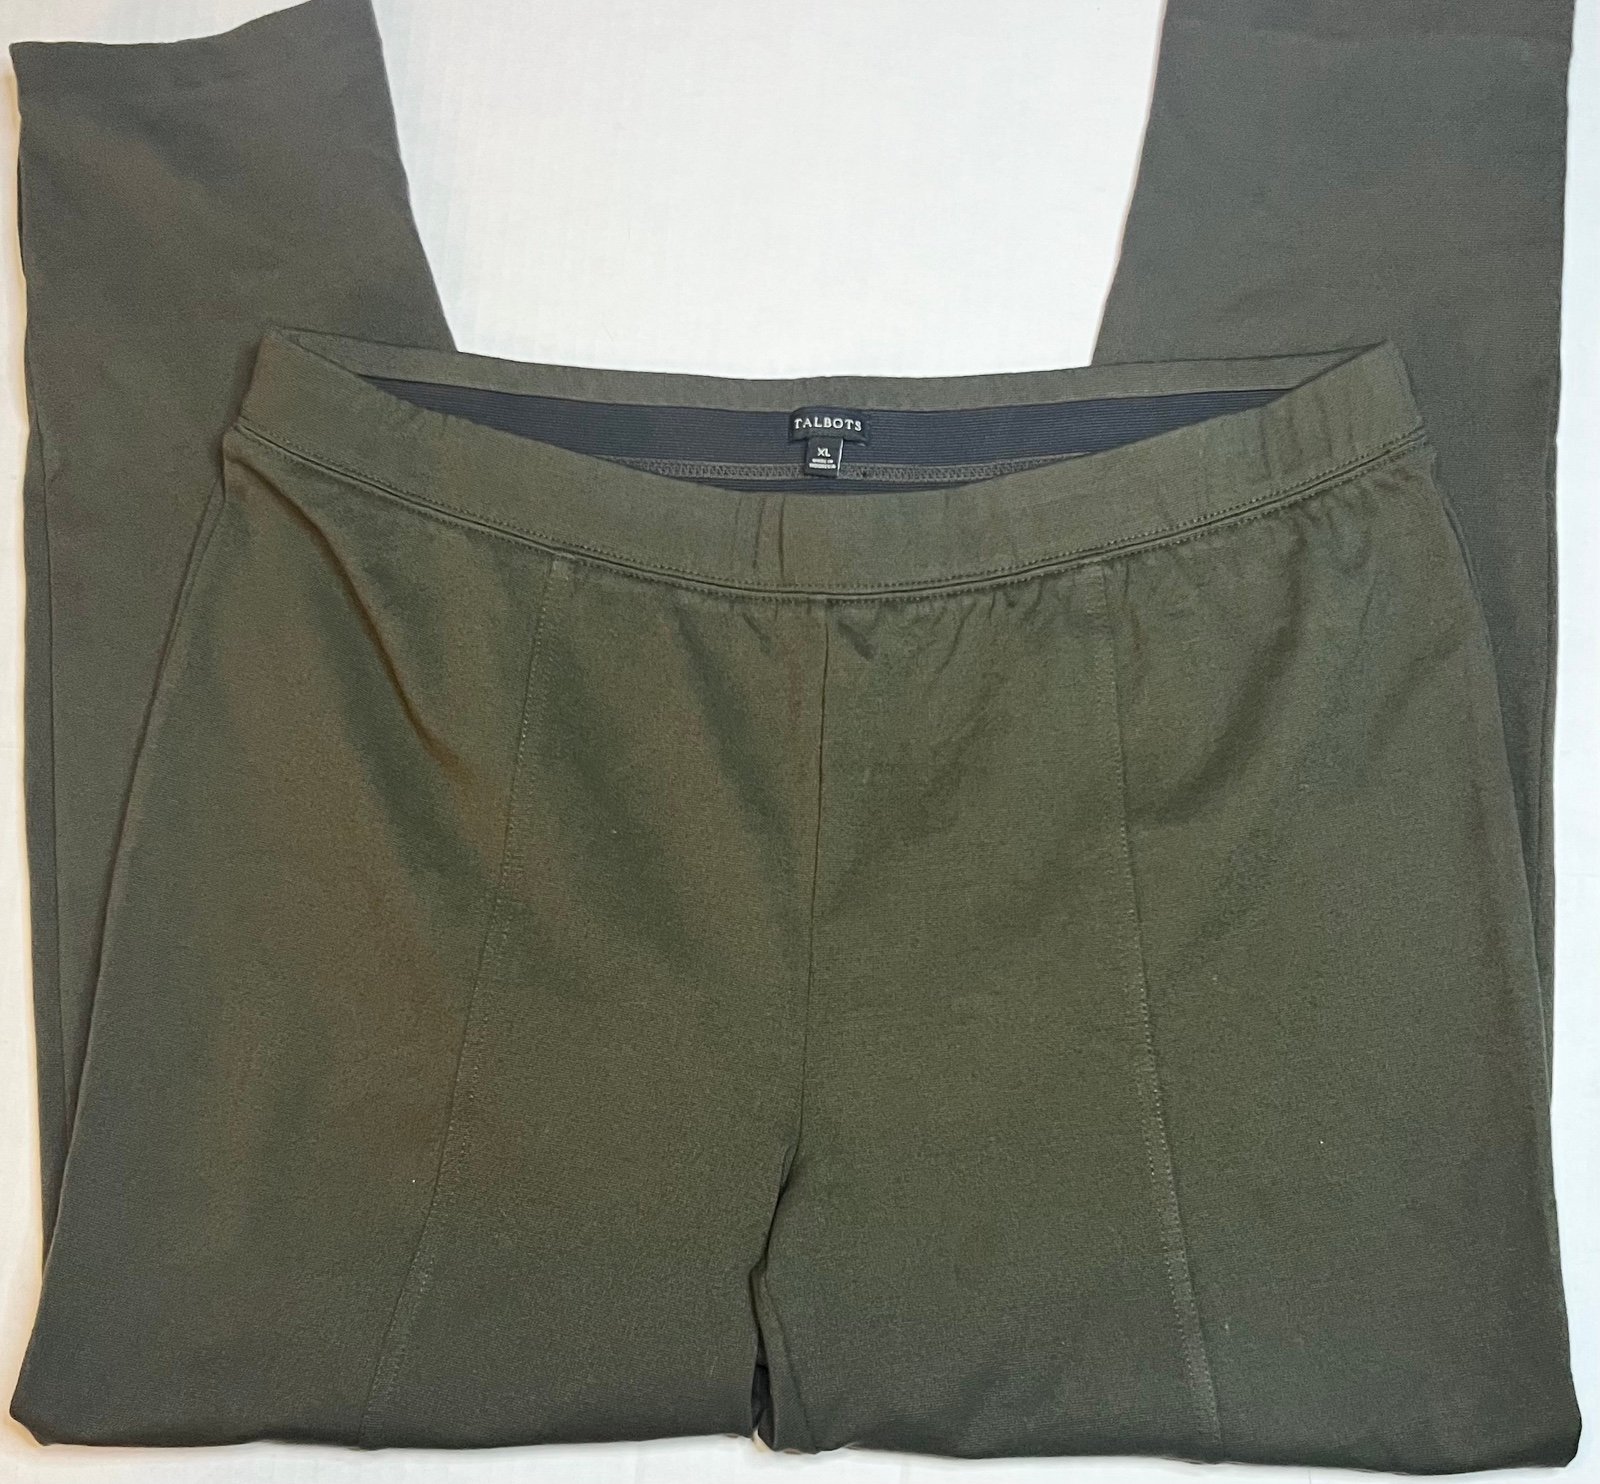 save up to 70% Talbots Leggings Womens Sz XL Skinny Ankle Olive Green Pull On Snap Button Legs GrzcjYIG6 New Style